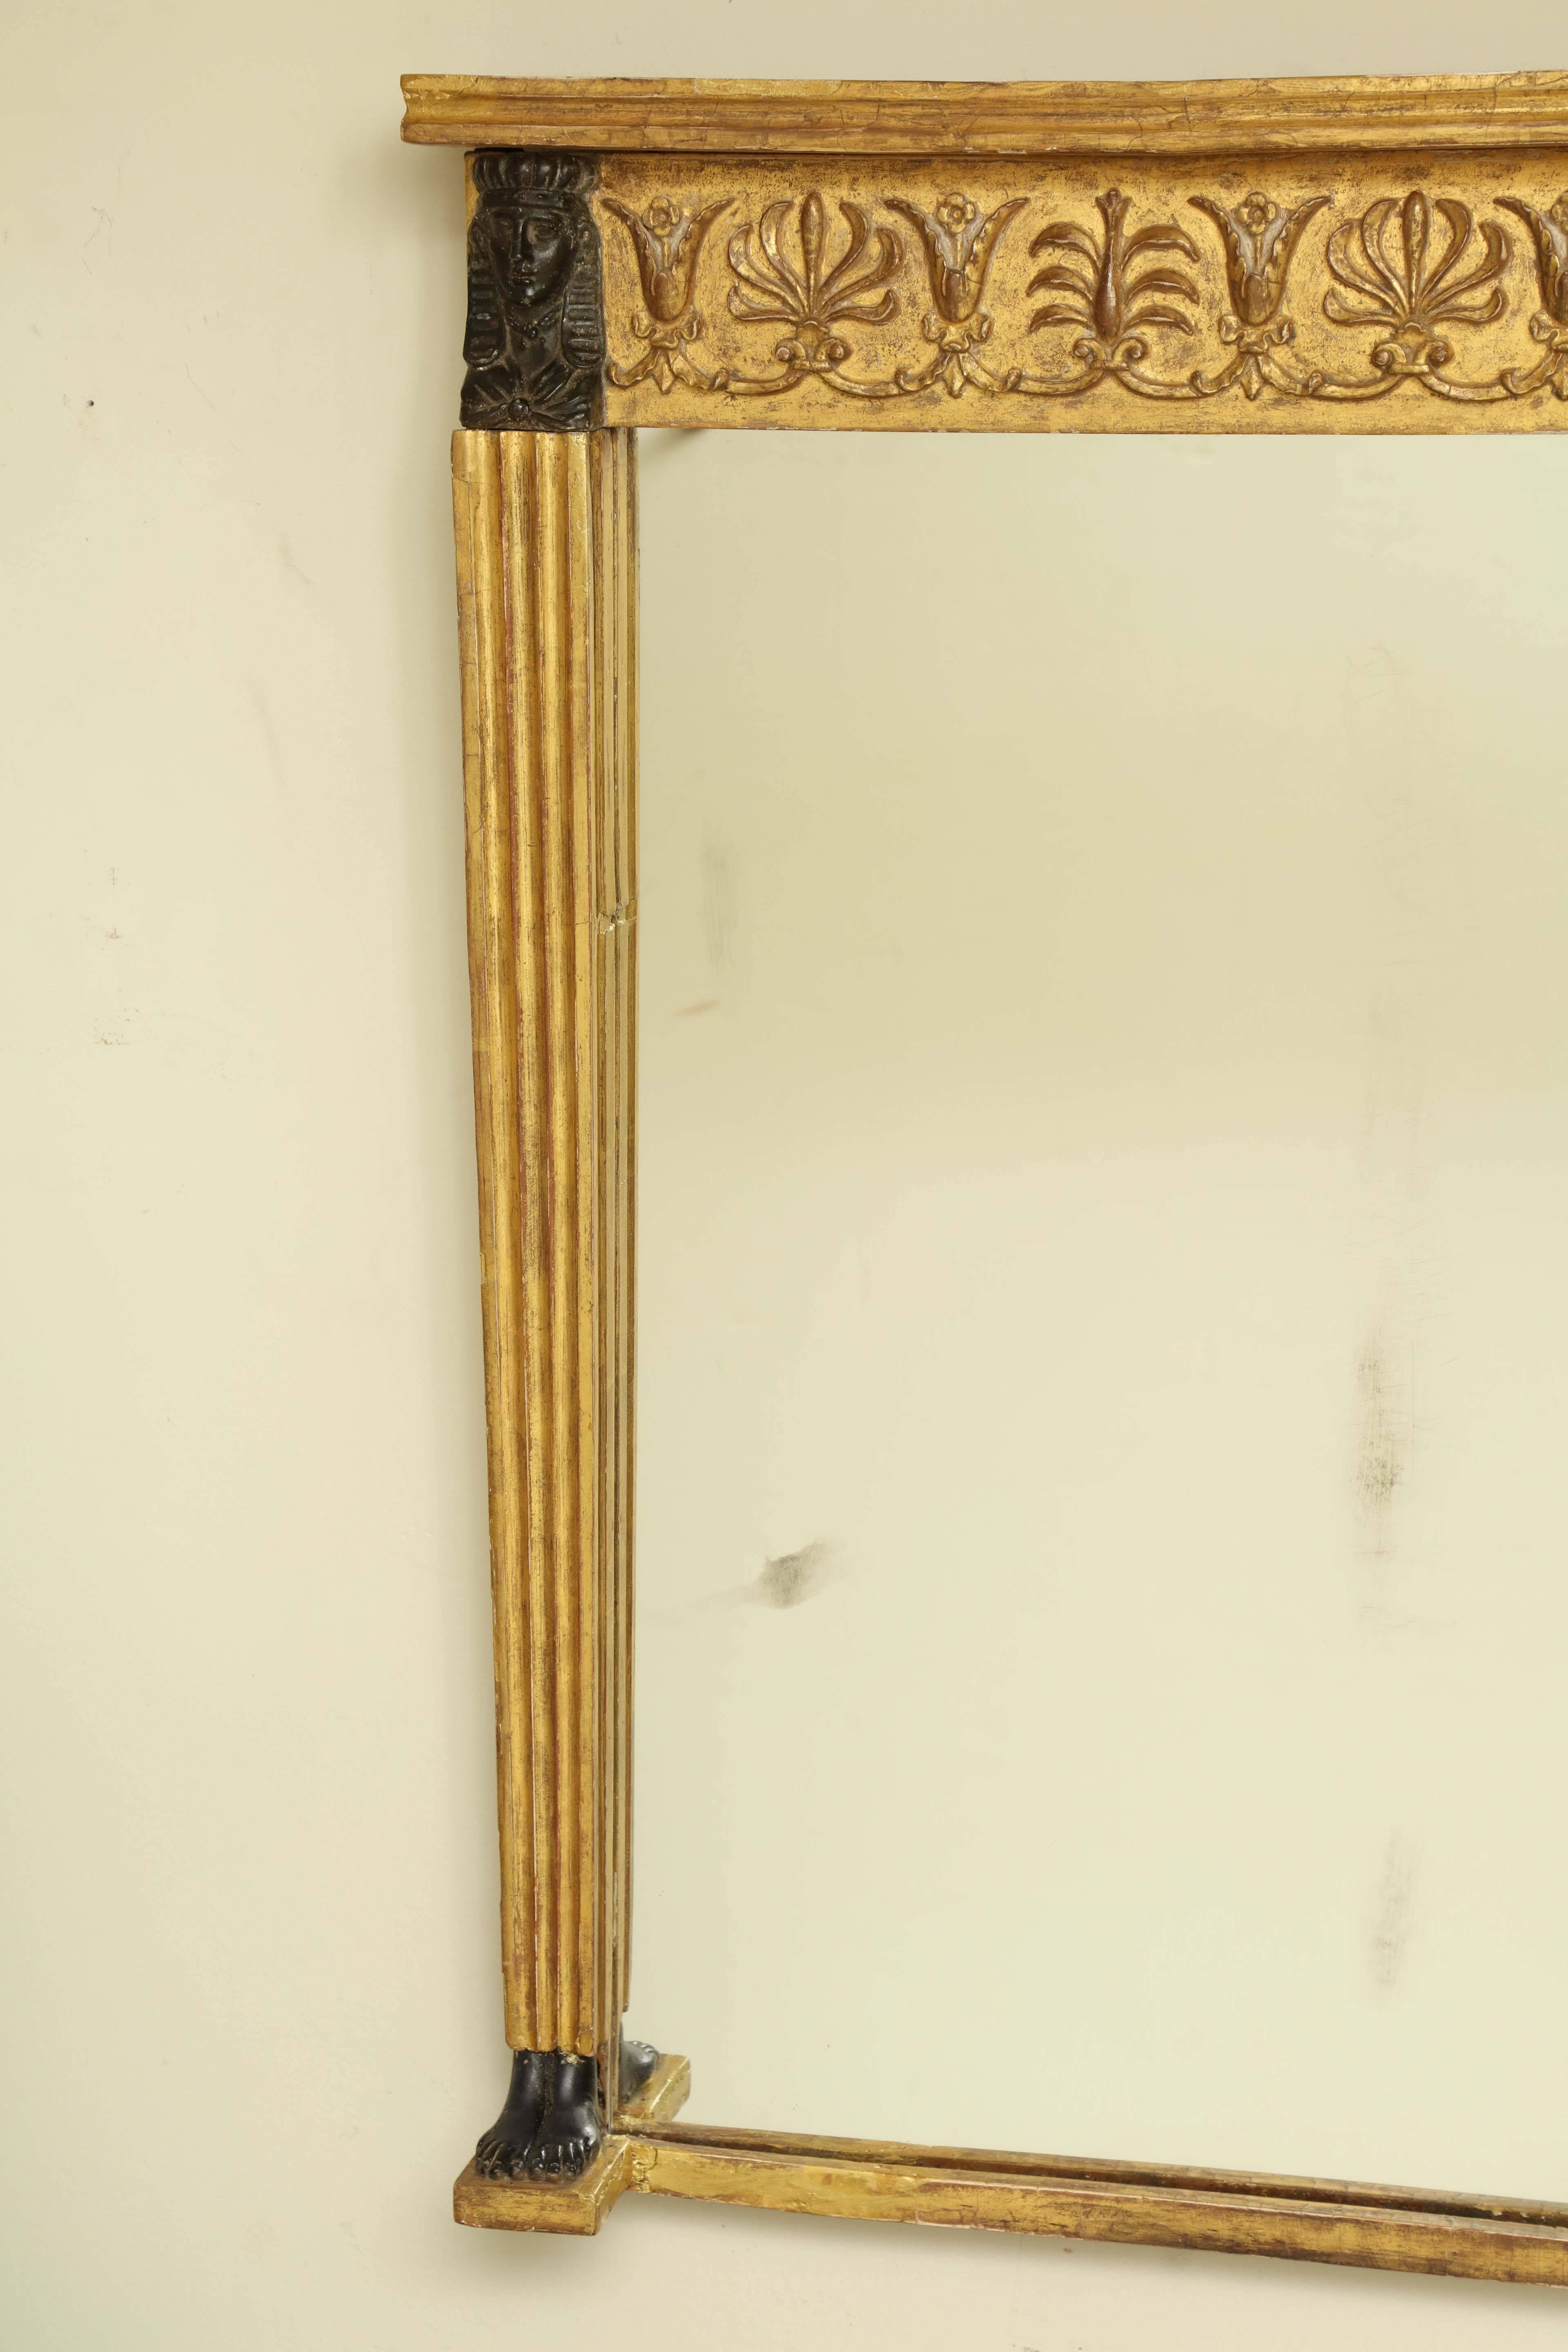 Unusual pair of Regency carved gilt and ebonized overmantel mirrors.